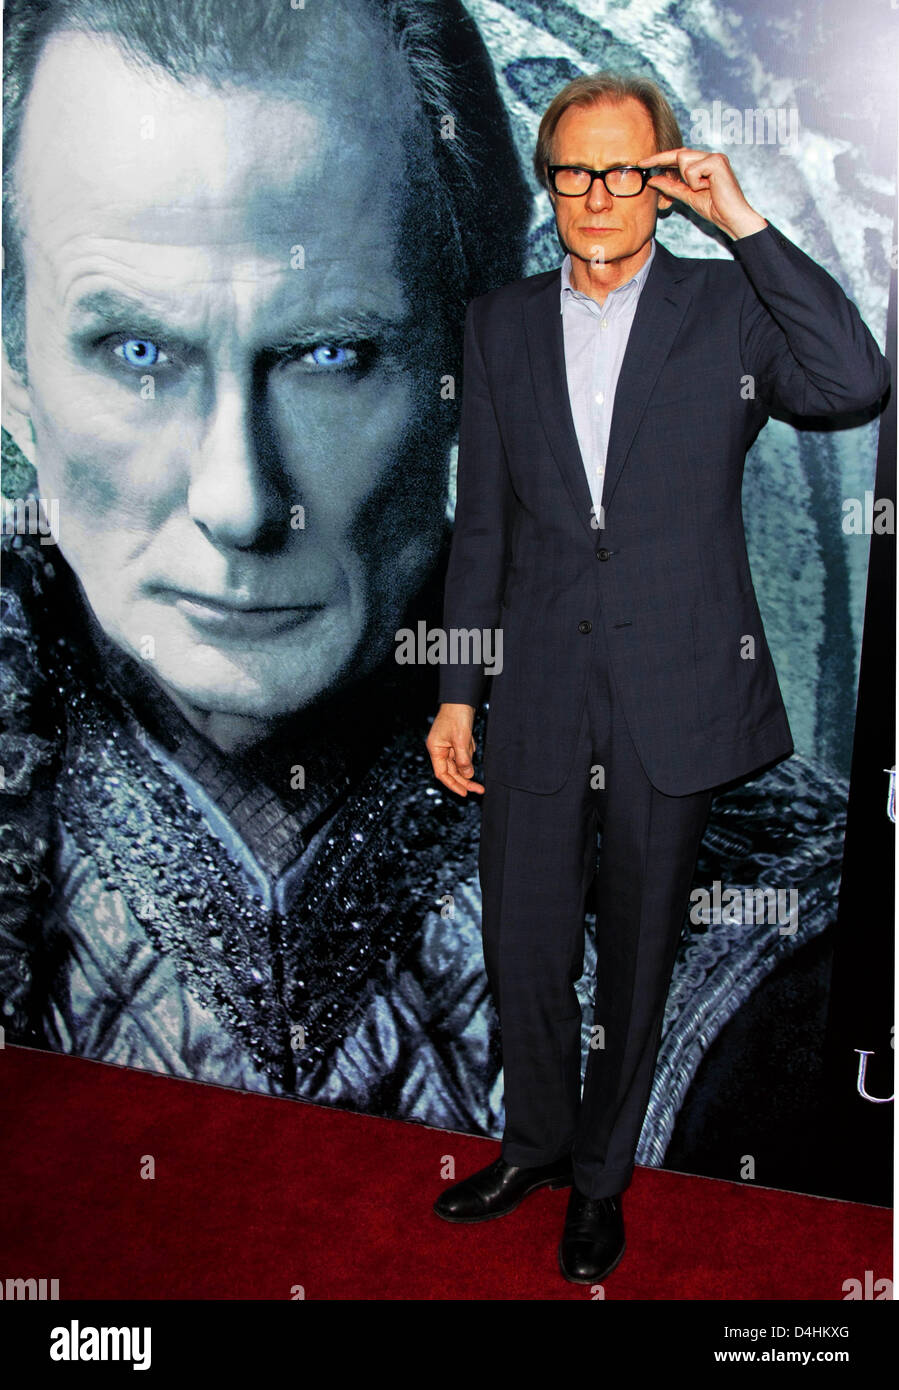 Actor Bill Nighy arrives at the world premiere of the movie ?Underworld: Rise of the Lycans? at Arclight Theatres in Hollywood, Los Angeles, USA, 22 January 2009. Photo: Hubert Boesl Stock Photo